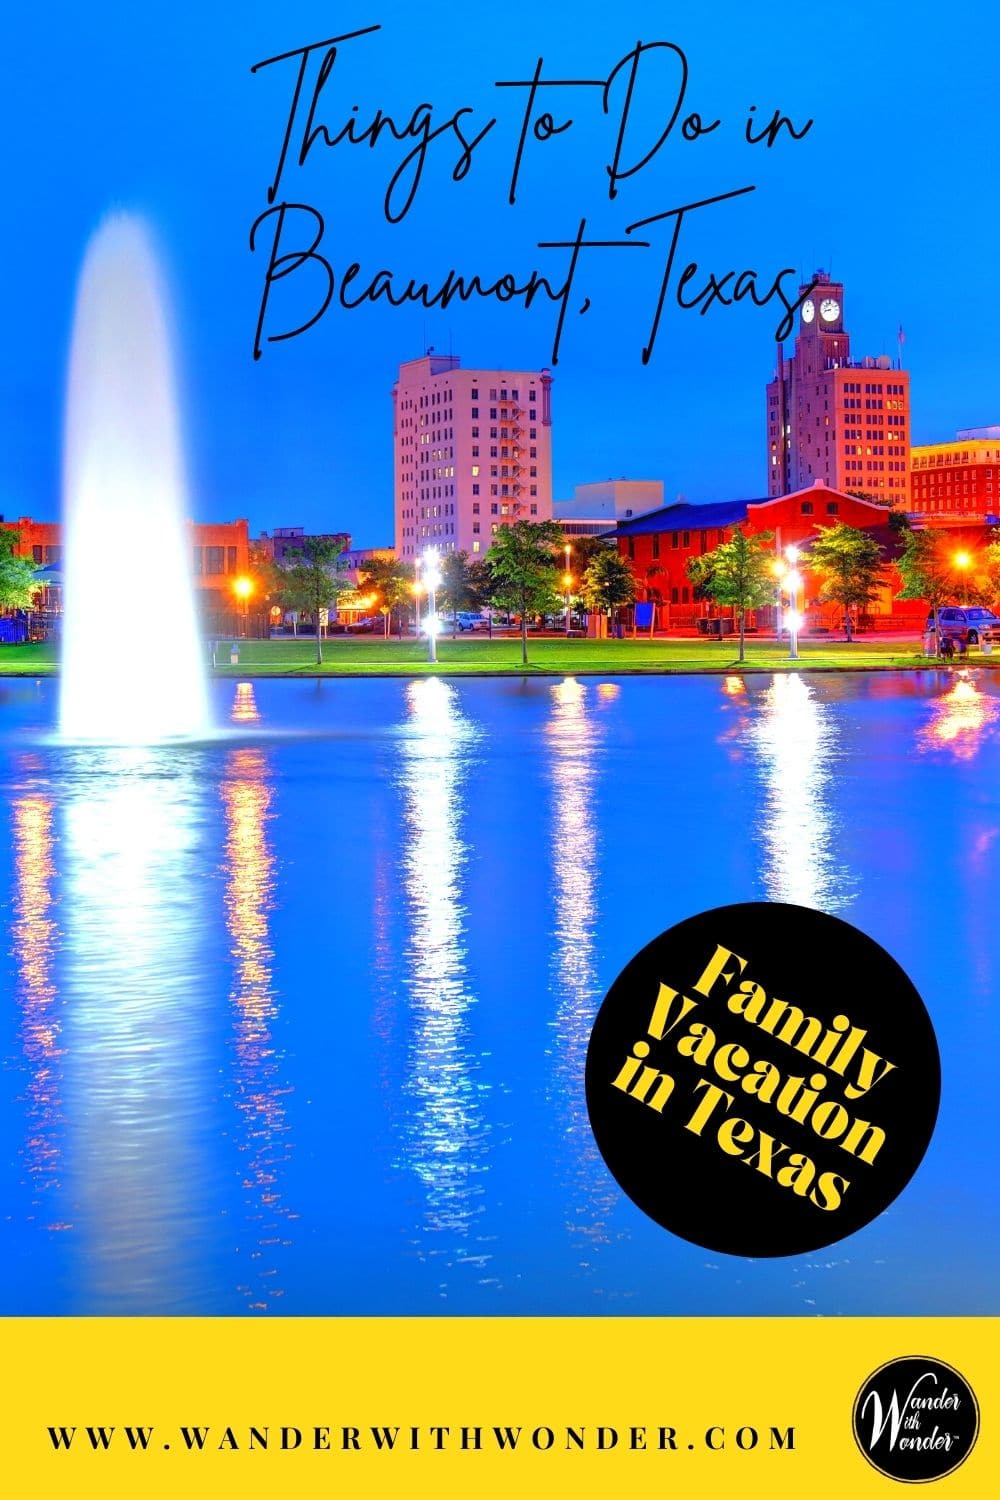 Beaumont Texas, east of Houston, offers great Tex-Mex and Cajun cuisine, along with superb outdoor recreation opportunities, like exploring the wilderness or discovering birds. Here are the best things to do in Beaumont, Texas.